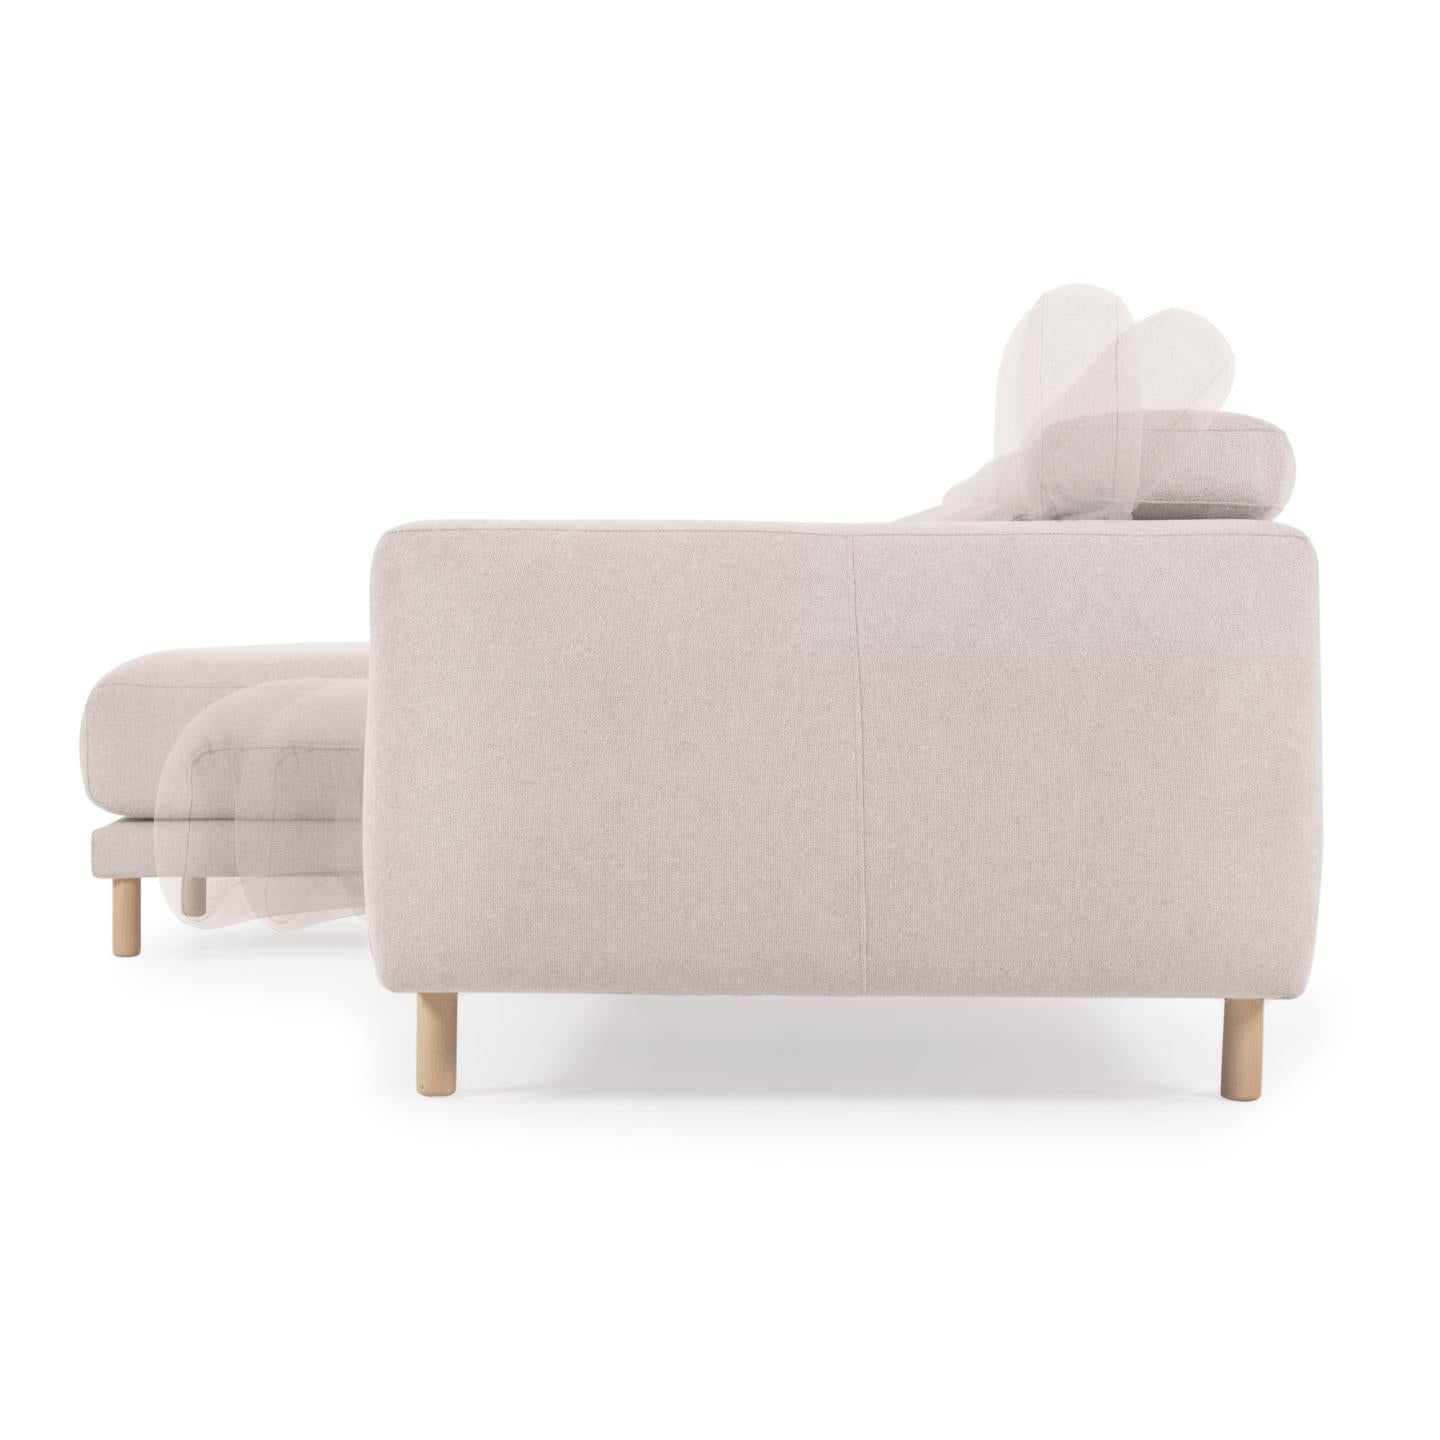 Singa 3 seater sofa with left-hand chaise longue in white, 296 cm